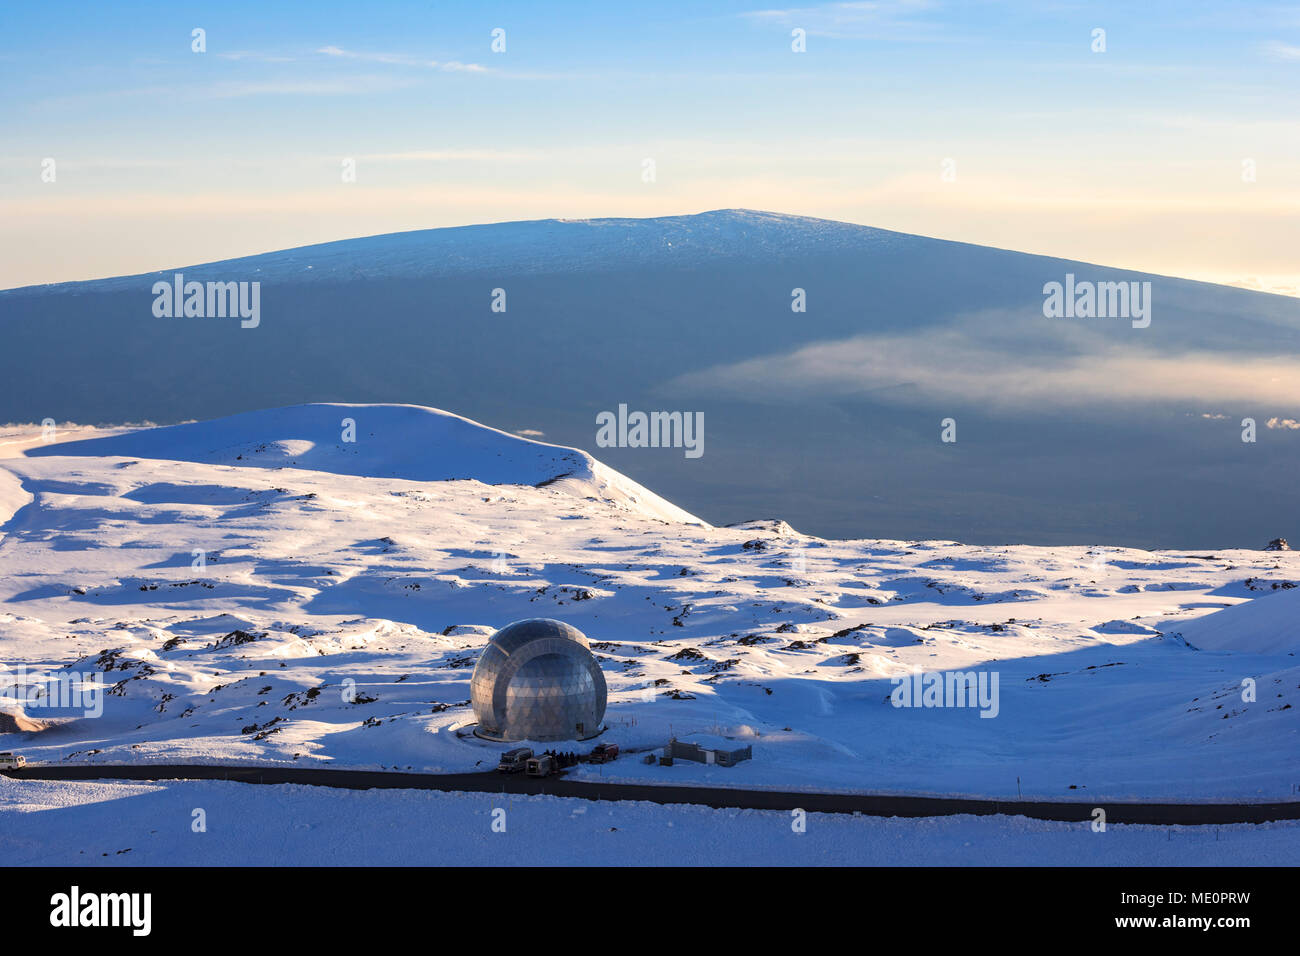 Decommissioned Caltech Submillimeter Observatory atop Mauna Kea with view to Mauna Loa; Island of Hawaii, Hawaii, United States of America Stock Photo